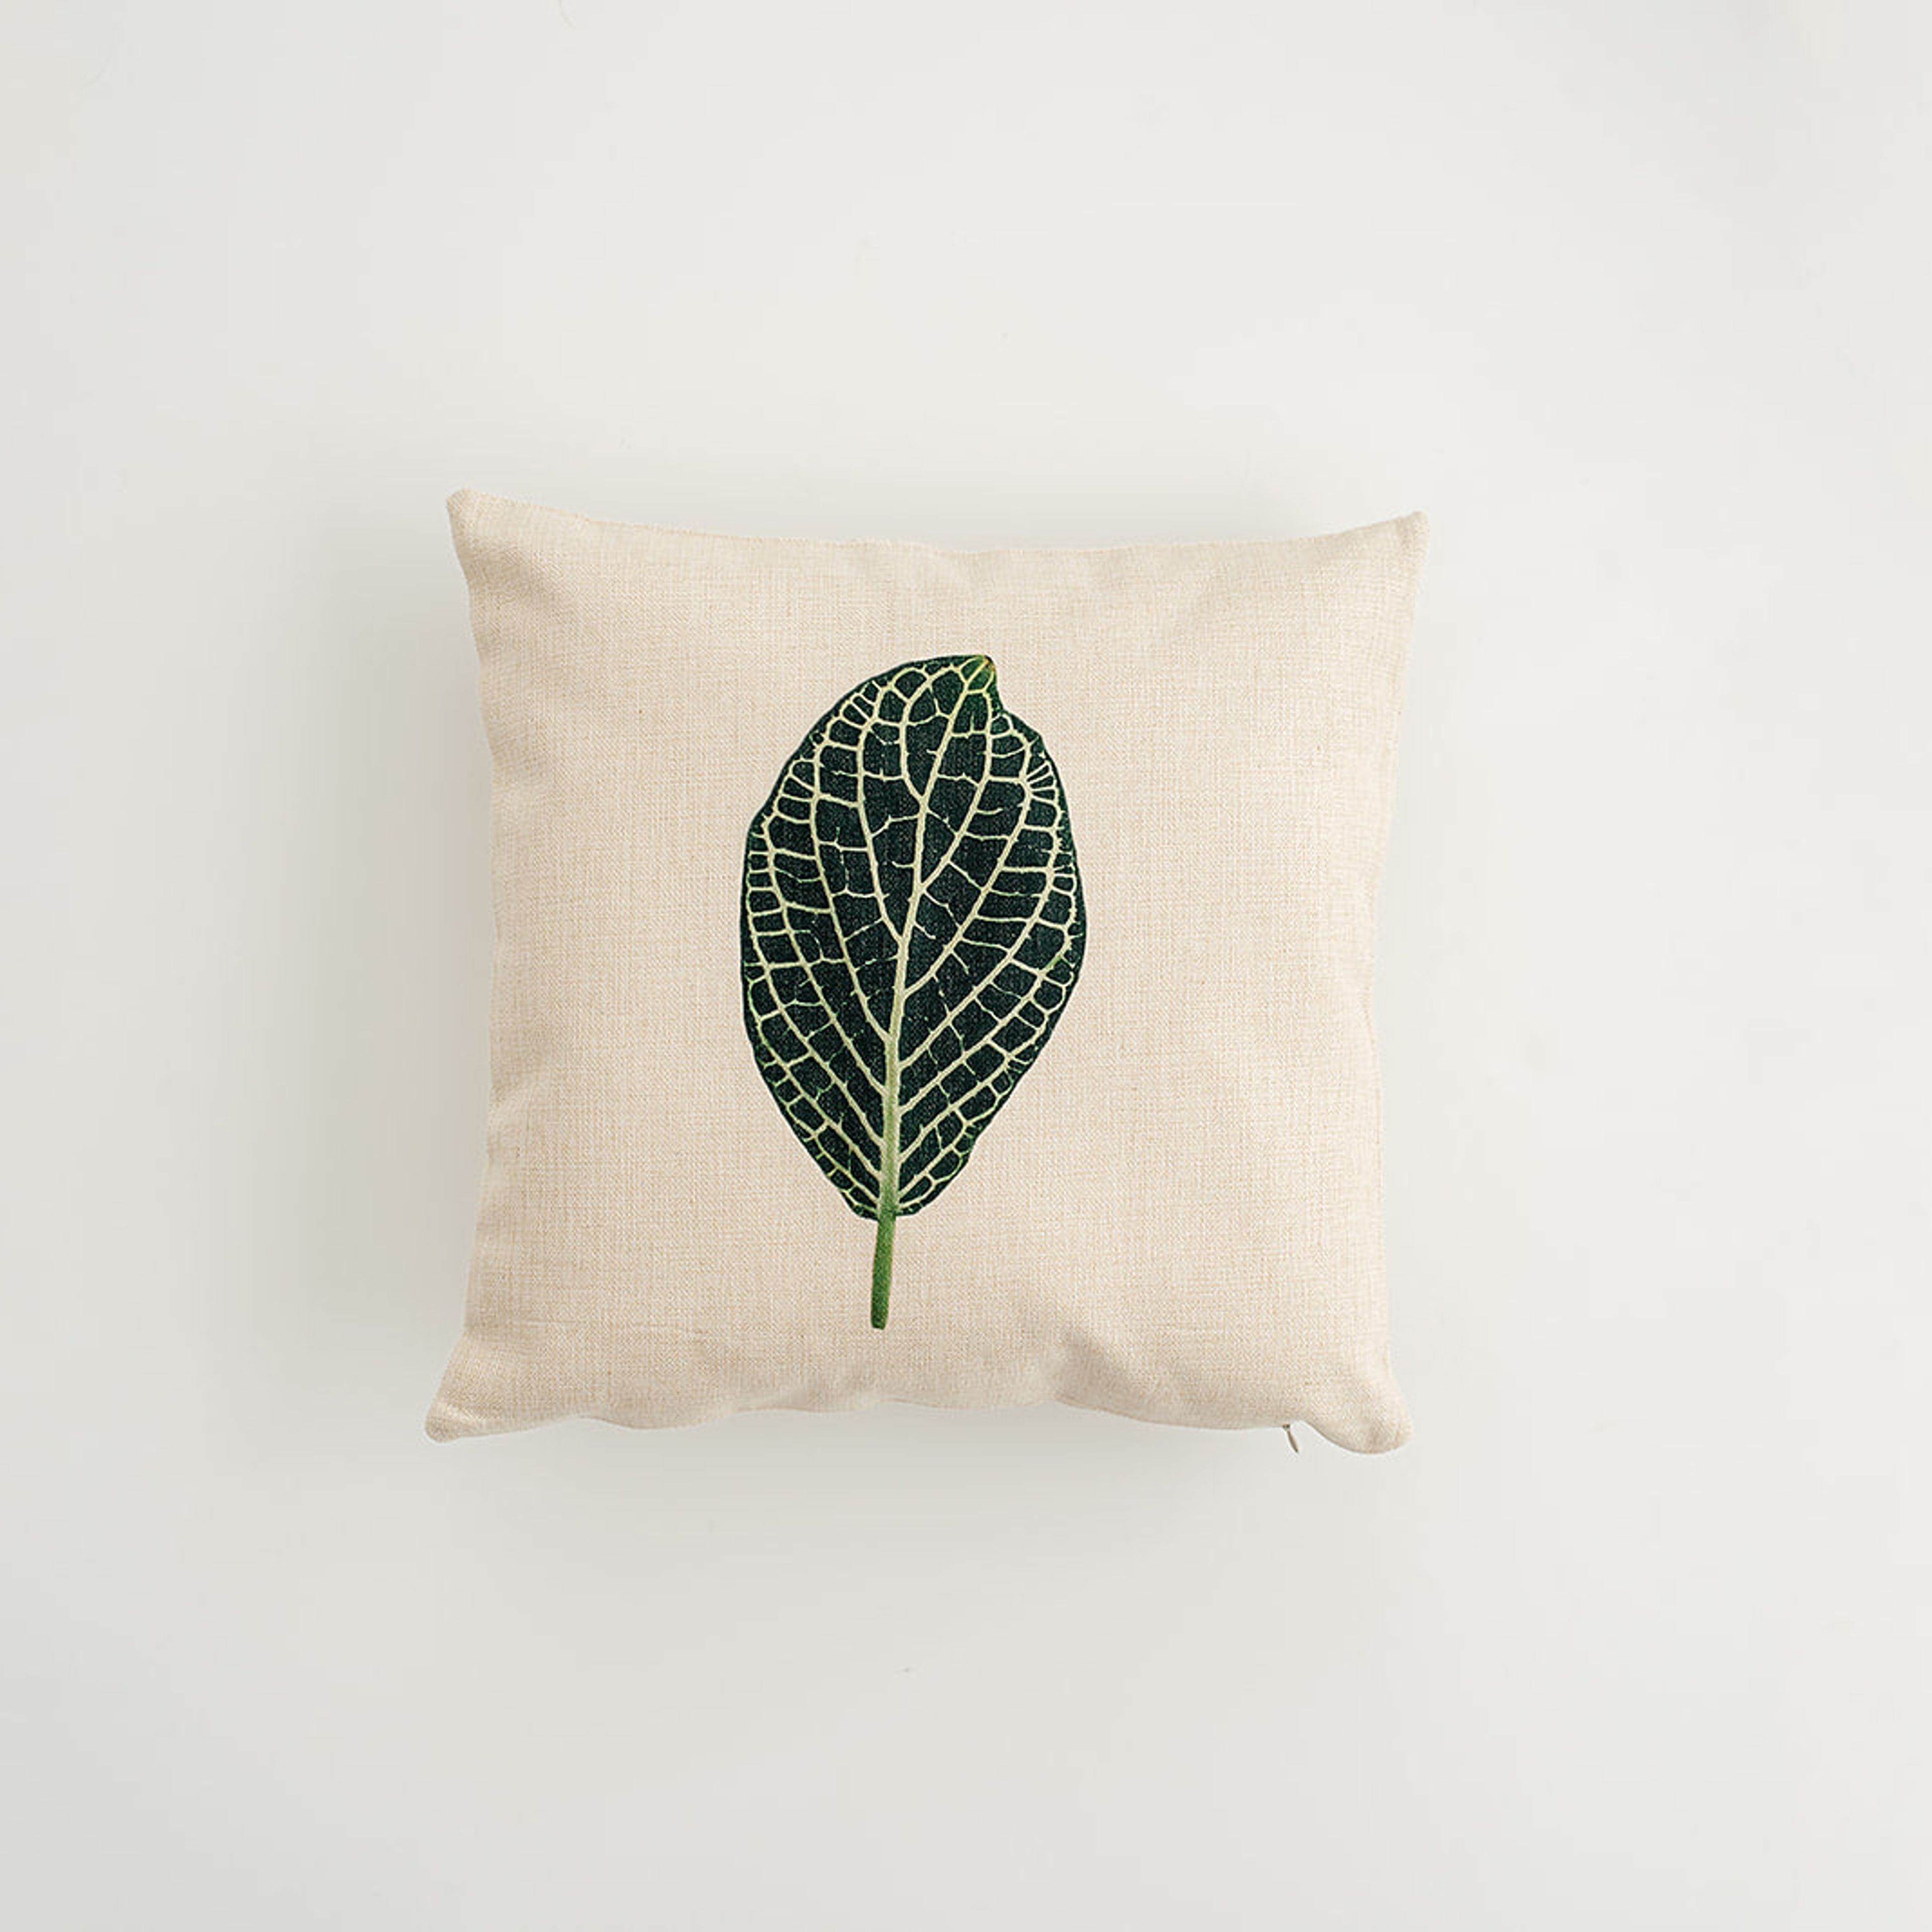 Mosaic Leaf Pillow Case, College Student Gift, Mother's Day Gift, Easter Gift